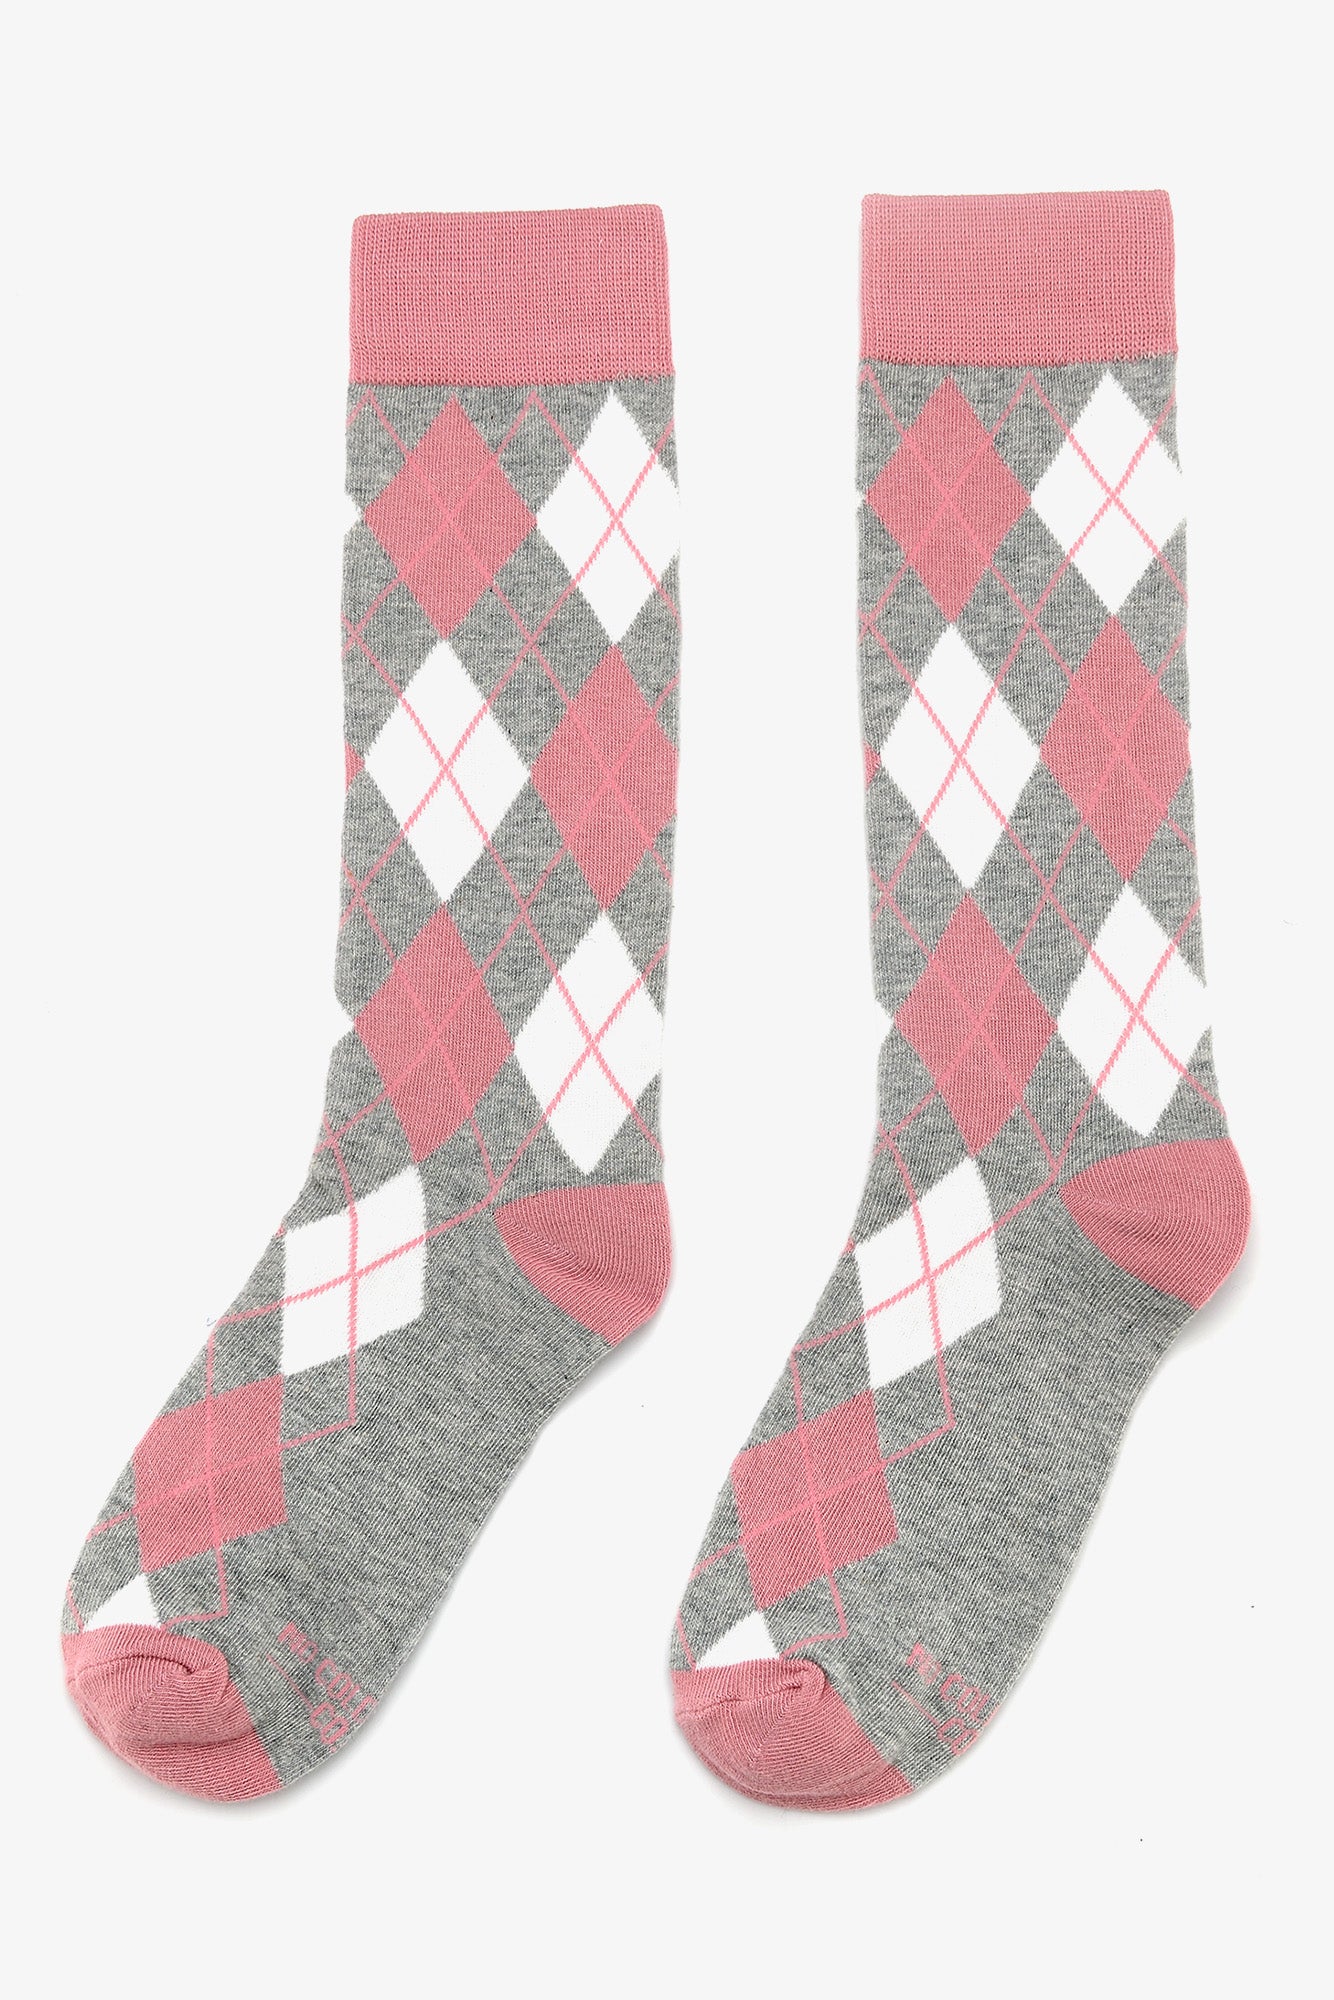 Dusty Rose and Grey Argyle Groomsmen Socks by No Cold Feet